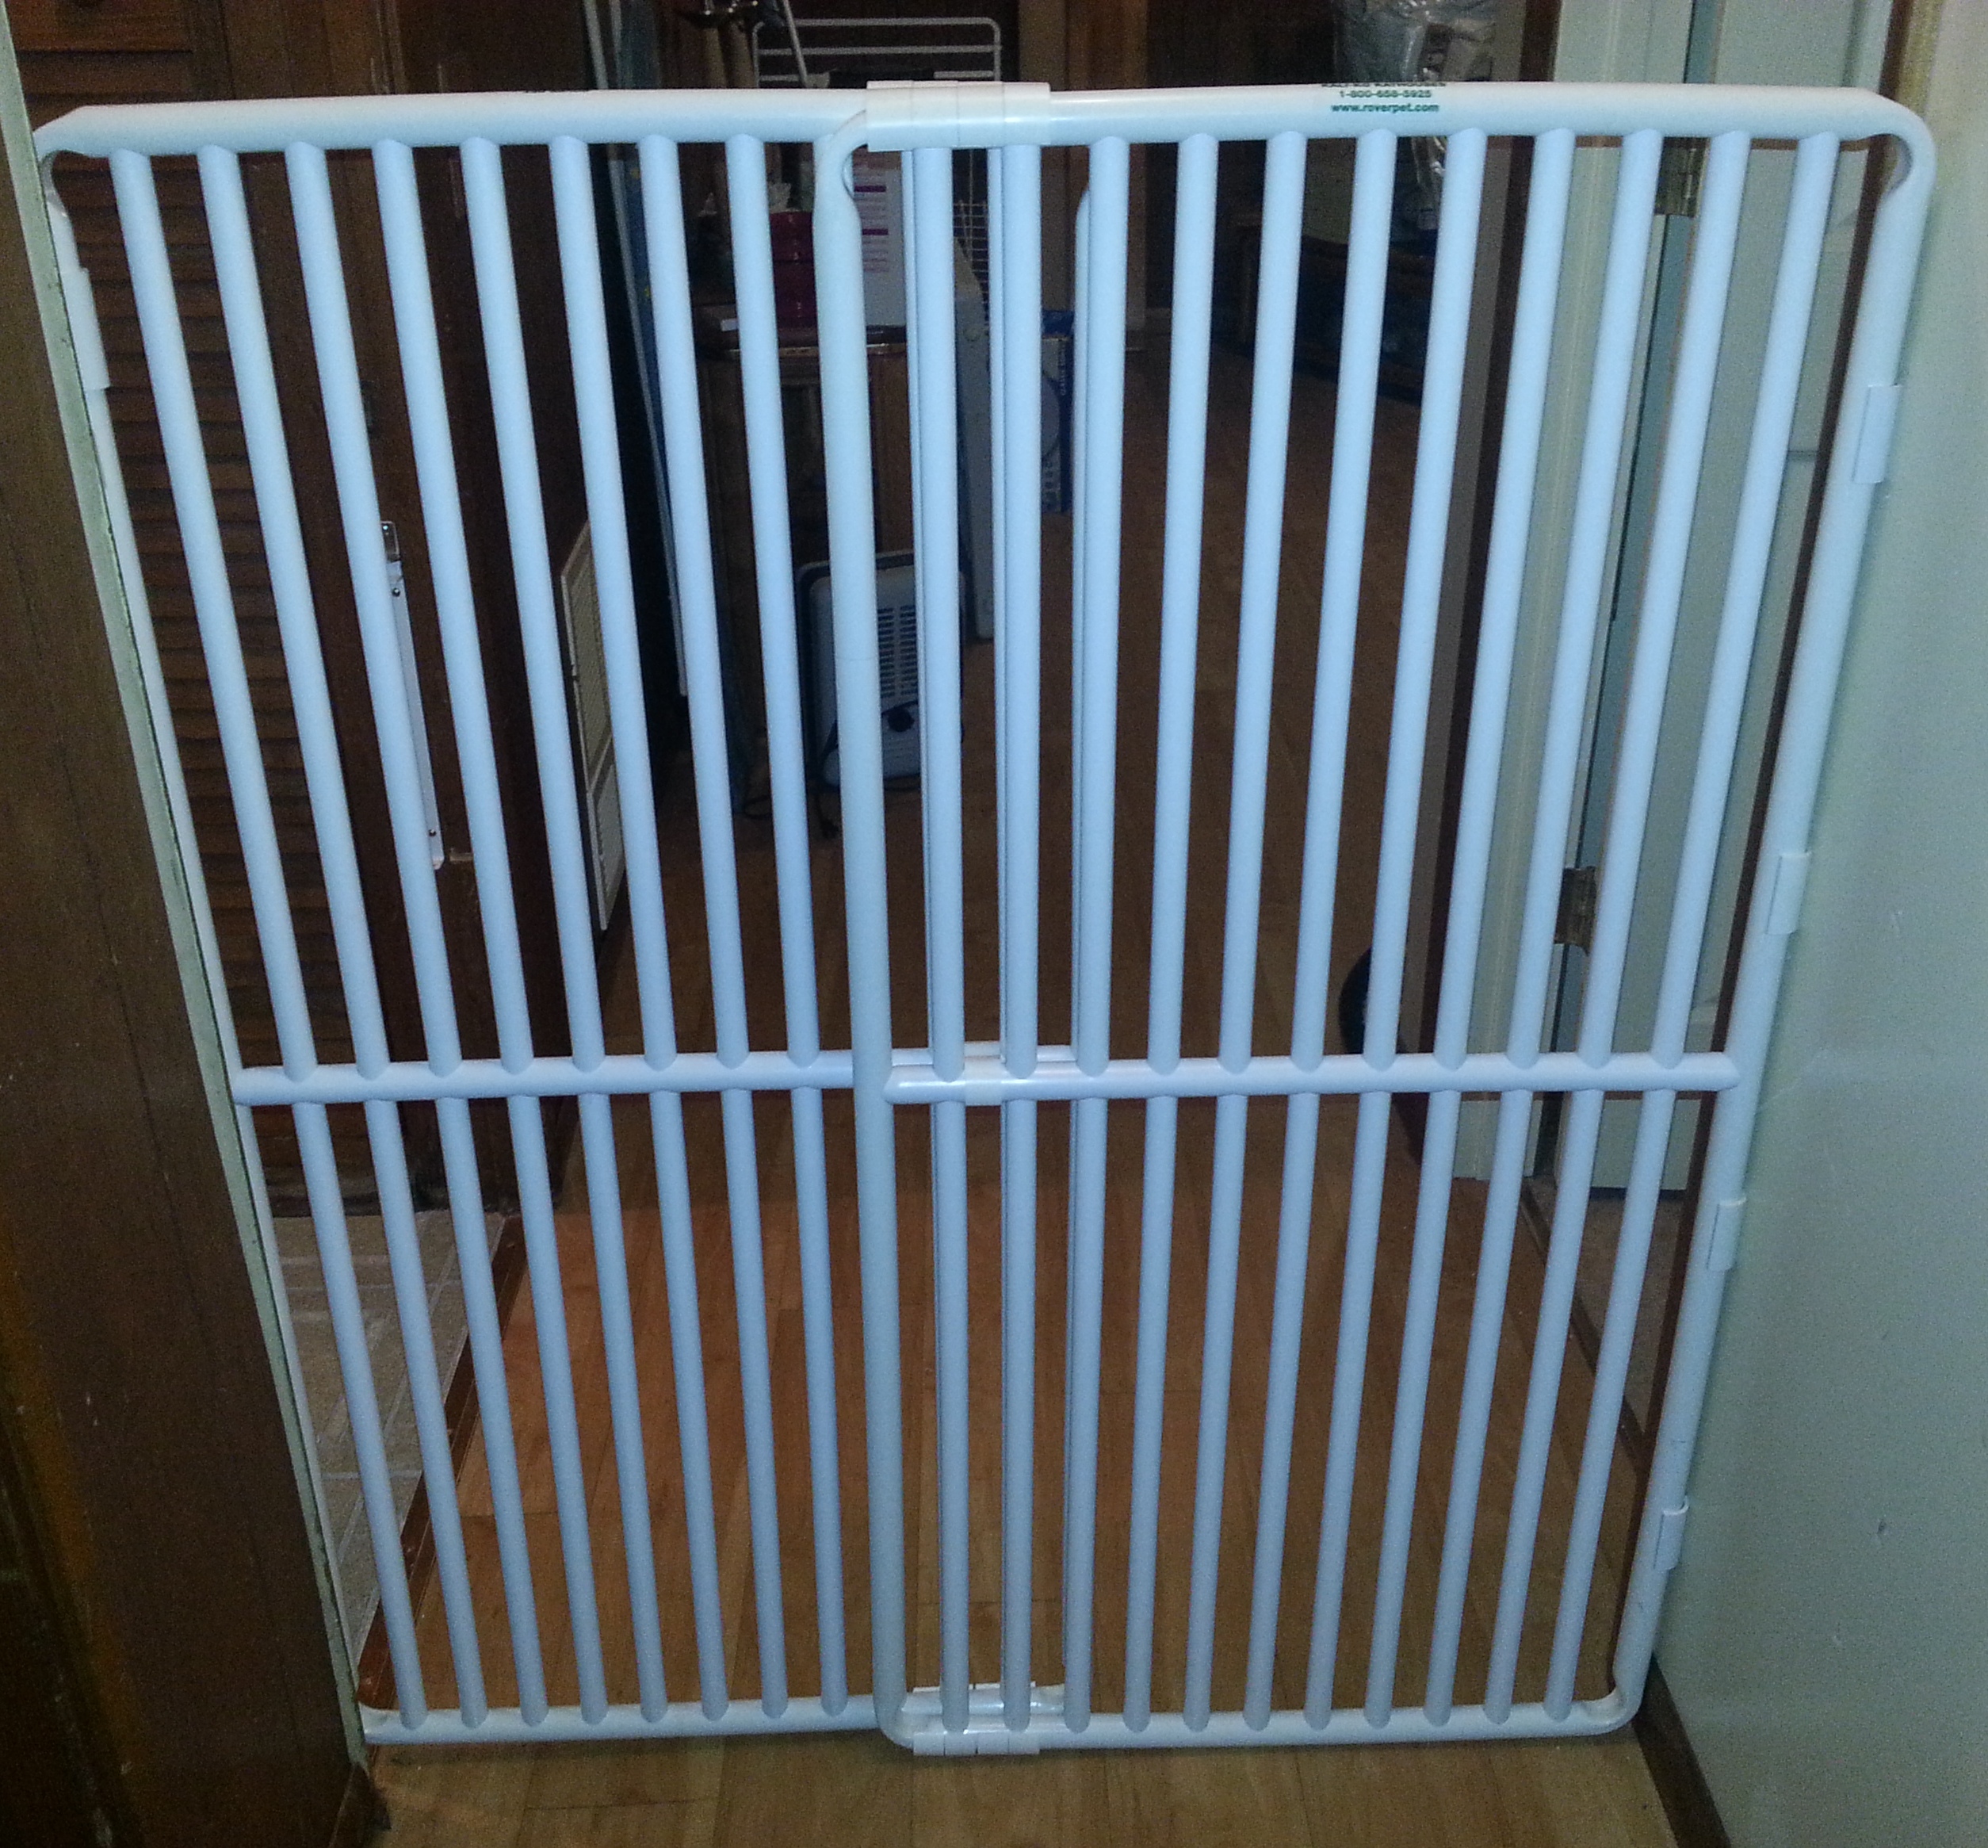 4 ft tall baby gate